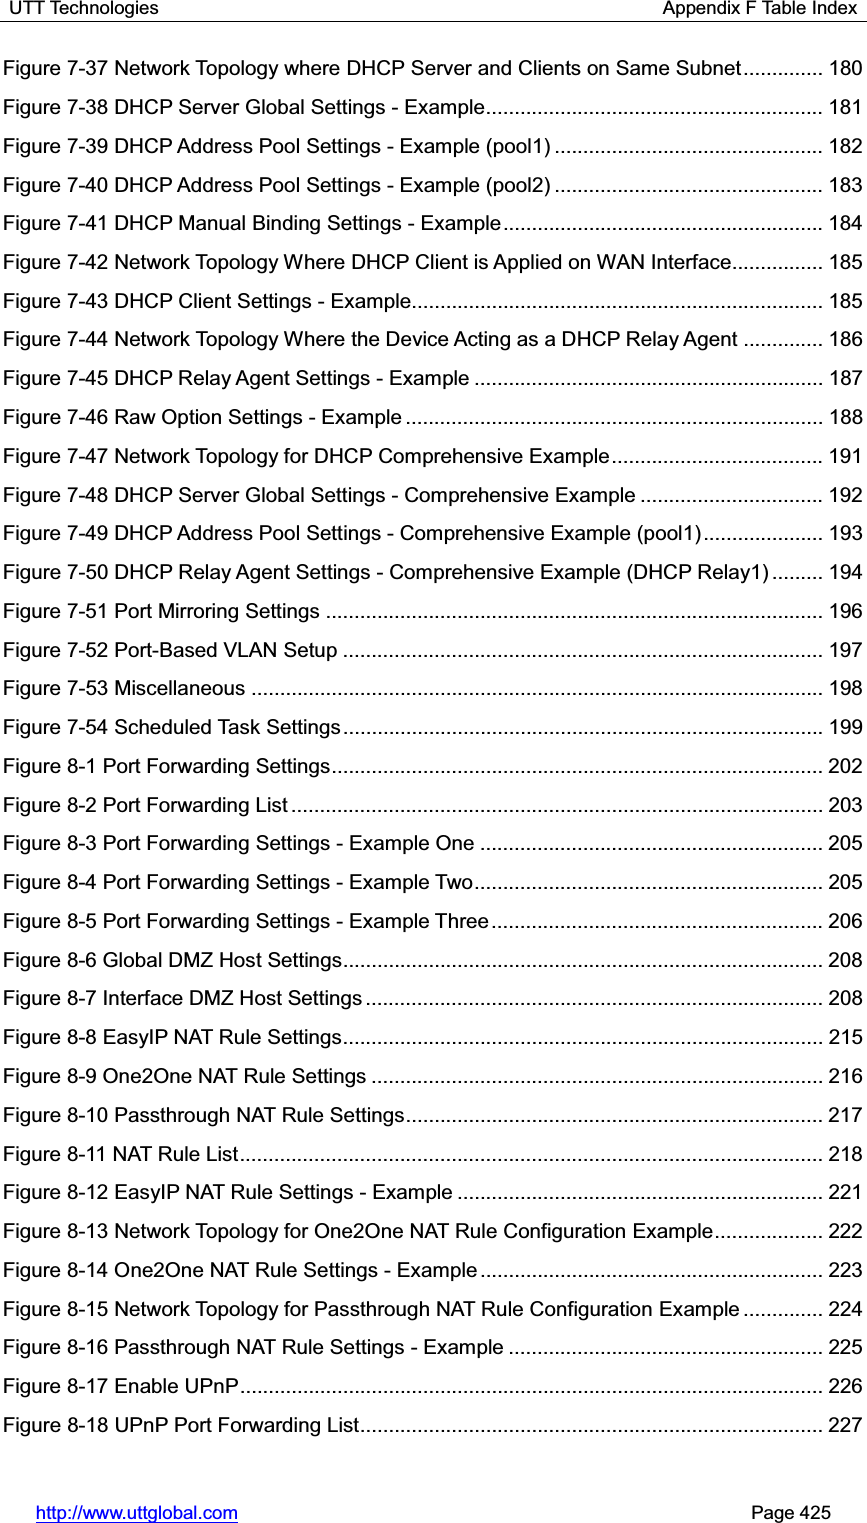 UTT Technologies                                                      Appendix F Table Index http://www.uttglobal.com                                                       Page 425 Figure 7-37 Network Topology where DHCP Server and Clients on Same Subnet .............. 180Figure 7-38 DHCP Server Global Settings - Example ........................................................... 181Figure 7-39 DHCP Address Pool Settings - Example (pool1) ............................................... 182Figure 7-40 DHCP Address Pool Settings - Example (pool2) ............................................... 183Figure 7-41 DHCP Manual Binding Settings - Example ........................................................ 184Figure 7-42 Network Topology Where DHCP Client is Applied on WAN Interface ................ 185Figure 7-43 DHCP Client Settings - Example........................................................................ 185Figure 7-44 Network Topology Where the Device Acting as a DHCP Relay Agent .............. 186Figure 7-45 DHCP Relay Agent Settings - Example ............................................................. 187Figure 7-46 Raw Option Settings - Example ......................................................................... 188Figure 7-47 Network Topology for DHCP Comprehensive Example ..................................... 191Figure 7-48 DHCP Server Global Settings - Comprehensive Example ................................ 192Figure 7-49 DHCP Address Pool Settings - Comprehensive Example (pool1) ..................... 193Figure 7-50 DHCP Relay Agent Settings - Comprehensive Example (DHCP Relay1) ......... 194Figure 7-51 Port Mirroring Settings ....................................................................................... 196Figure 7-52 Port-Based VLAN Setup .................................................................................... 197Figure 7-53 Miscellaneous .................................................................................................... 198Figure 7-54 Scheduled Task Settings .................................................................................... 199Figure 8-1 Port Forwarding Settings ...................................................................................... 202Figure 8-2 Port Forwarding List ............................................................................................. 203Figure 8-3 Port Forwarding Settings - Example One ............................................................ 205Figure 8-4 Port Forwarding Settings - Example Two ............................................................. 205Figure 8-5 Port Forwarding Settings - Example Three .......................................................... 206Figure 8-6 Global DMZ Host Settings .................................................................................... 208Figure 8-7 Interface DMZ Host Settings ................................................................................ 208Figure 8-8 EasyIP NAT Rule Settings.................................................................................... 215Figure 8-9 One2One NAT Rule Settings ............................................................................... 216Figure 8-10 Passthrough NAT Rule Settings ......................................................................... 217Figure 8-11 NAT Rule List ...................................................................................................... 218Figure 8-12 EasyIP NAT Rule Settings - Example ................................................................ 221Figure 8-13 Network Topology for One2One NAT Rule Configuration Example ................... 222Figure 8-14 One2One NAT Rule Settings - Example ............................................................ 223Figure 8-15 Network Topology for Passthrough NAT Rule Configuration Example .............. 224Figure 8-16 Passthrough NAT Rule Settings - Example ....................................................... 225Figure 8-17 Enable UPnP ...................................................................................................... 226Figure 8-18 UPnP Port Forwarding List ................................................................................. 227